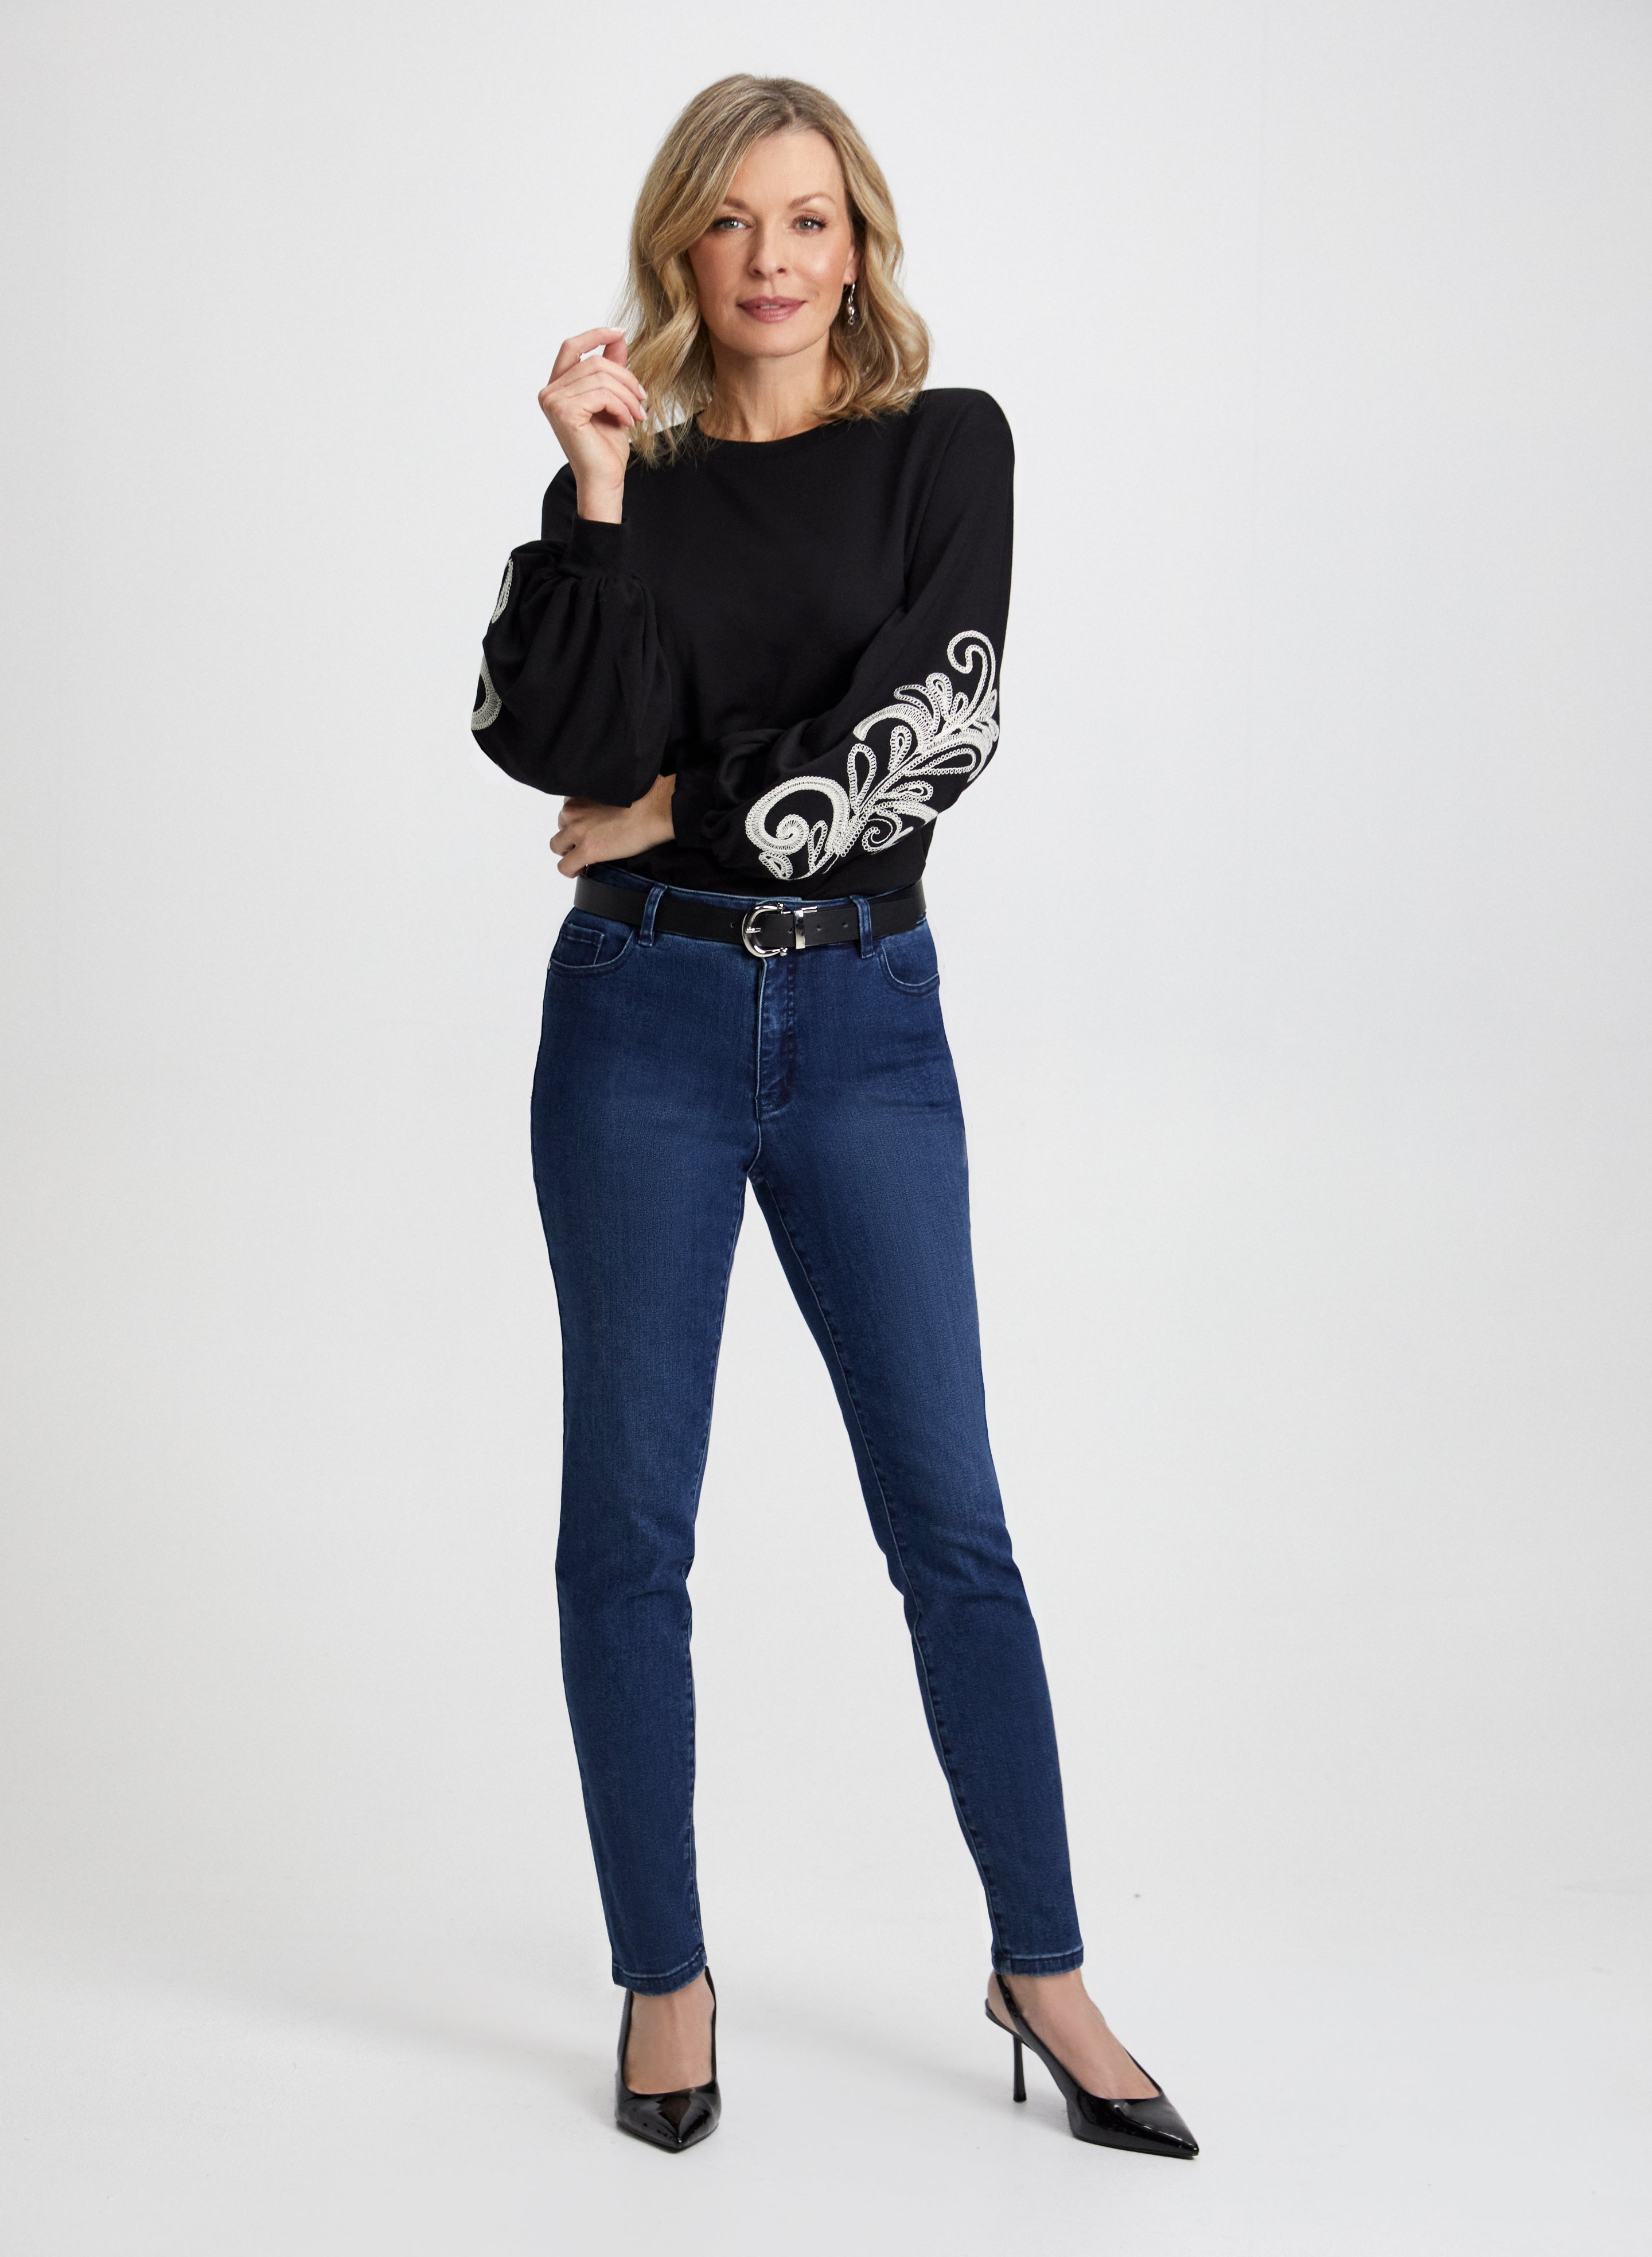 Embroidered Top & Slim Leg Jeans